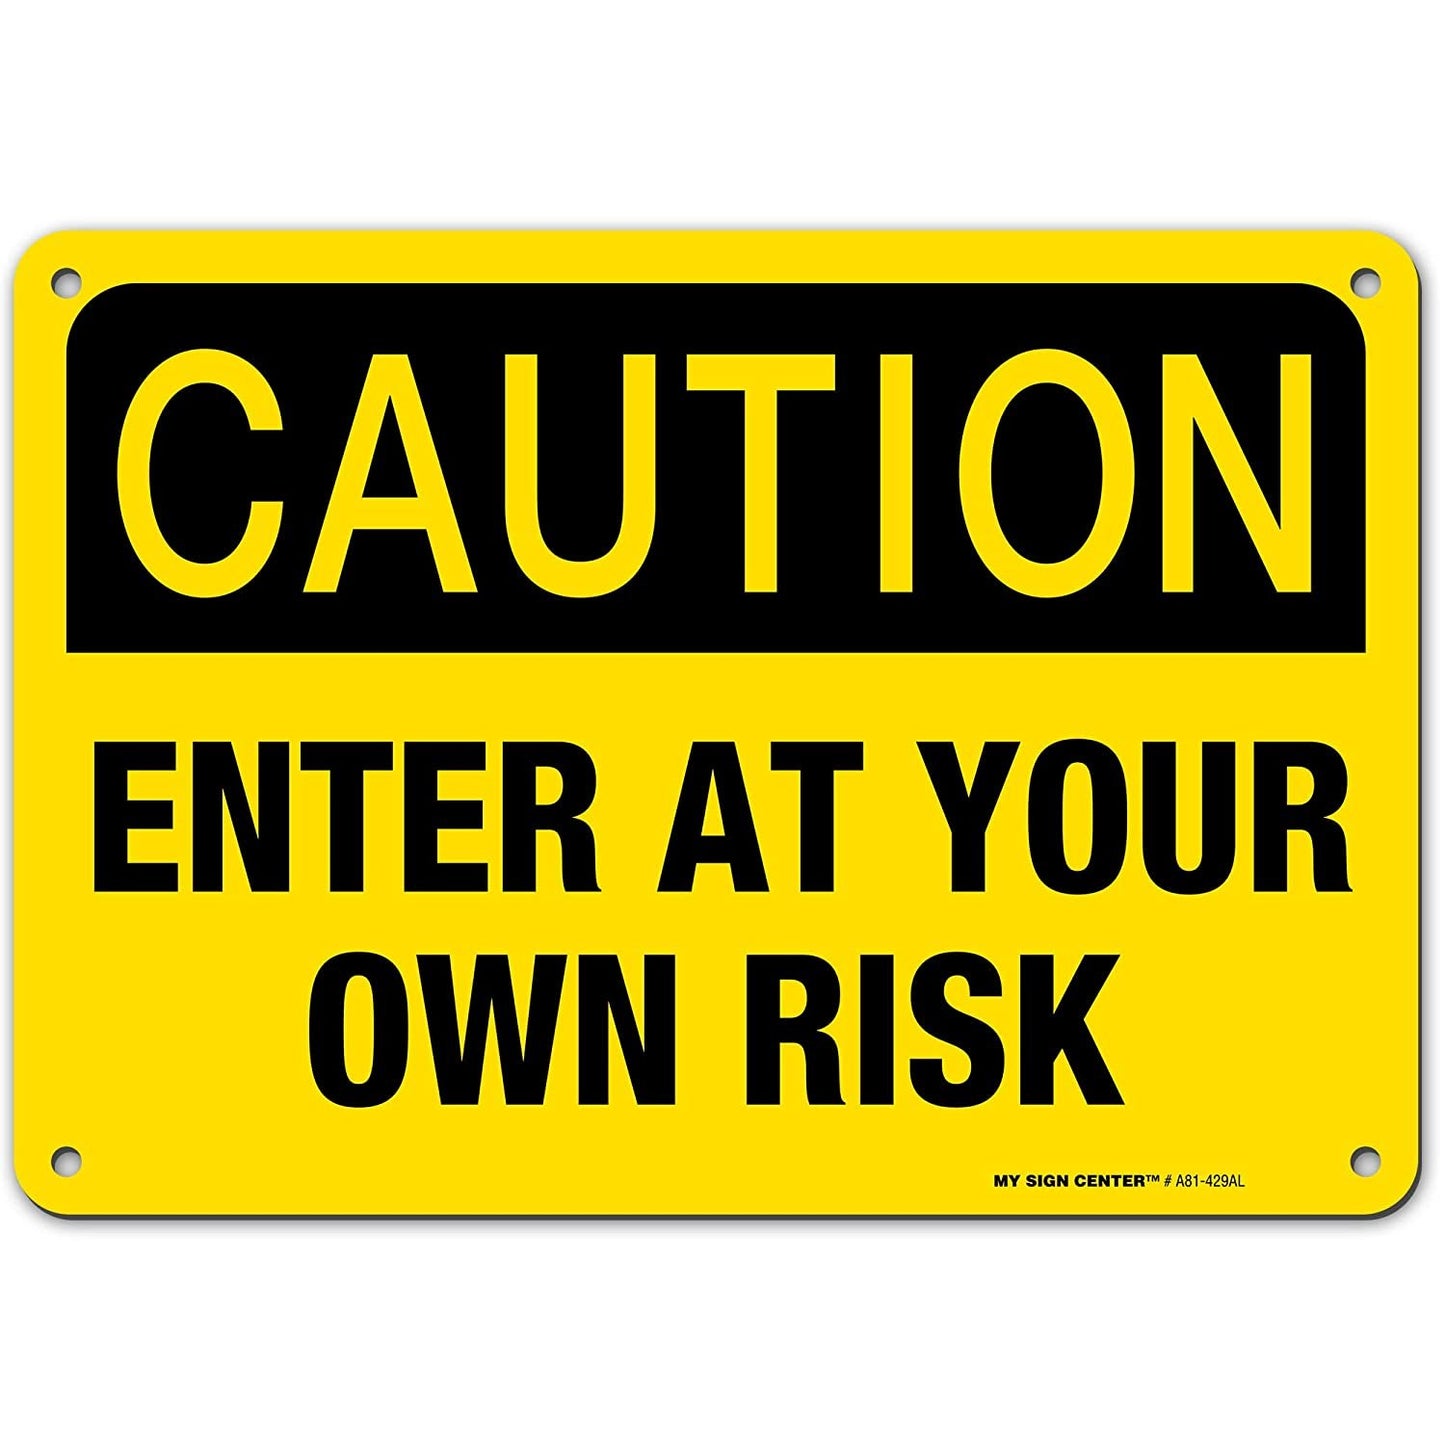 Caution Enter at Your Own Risk Laminated Safety Sign